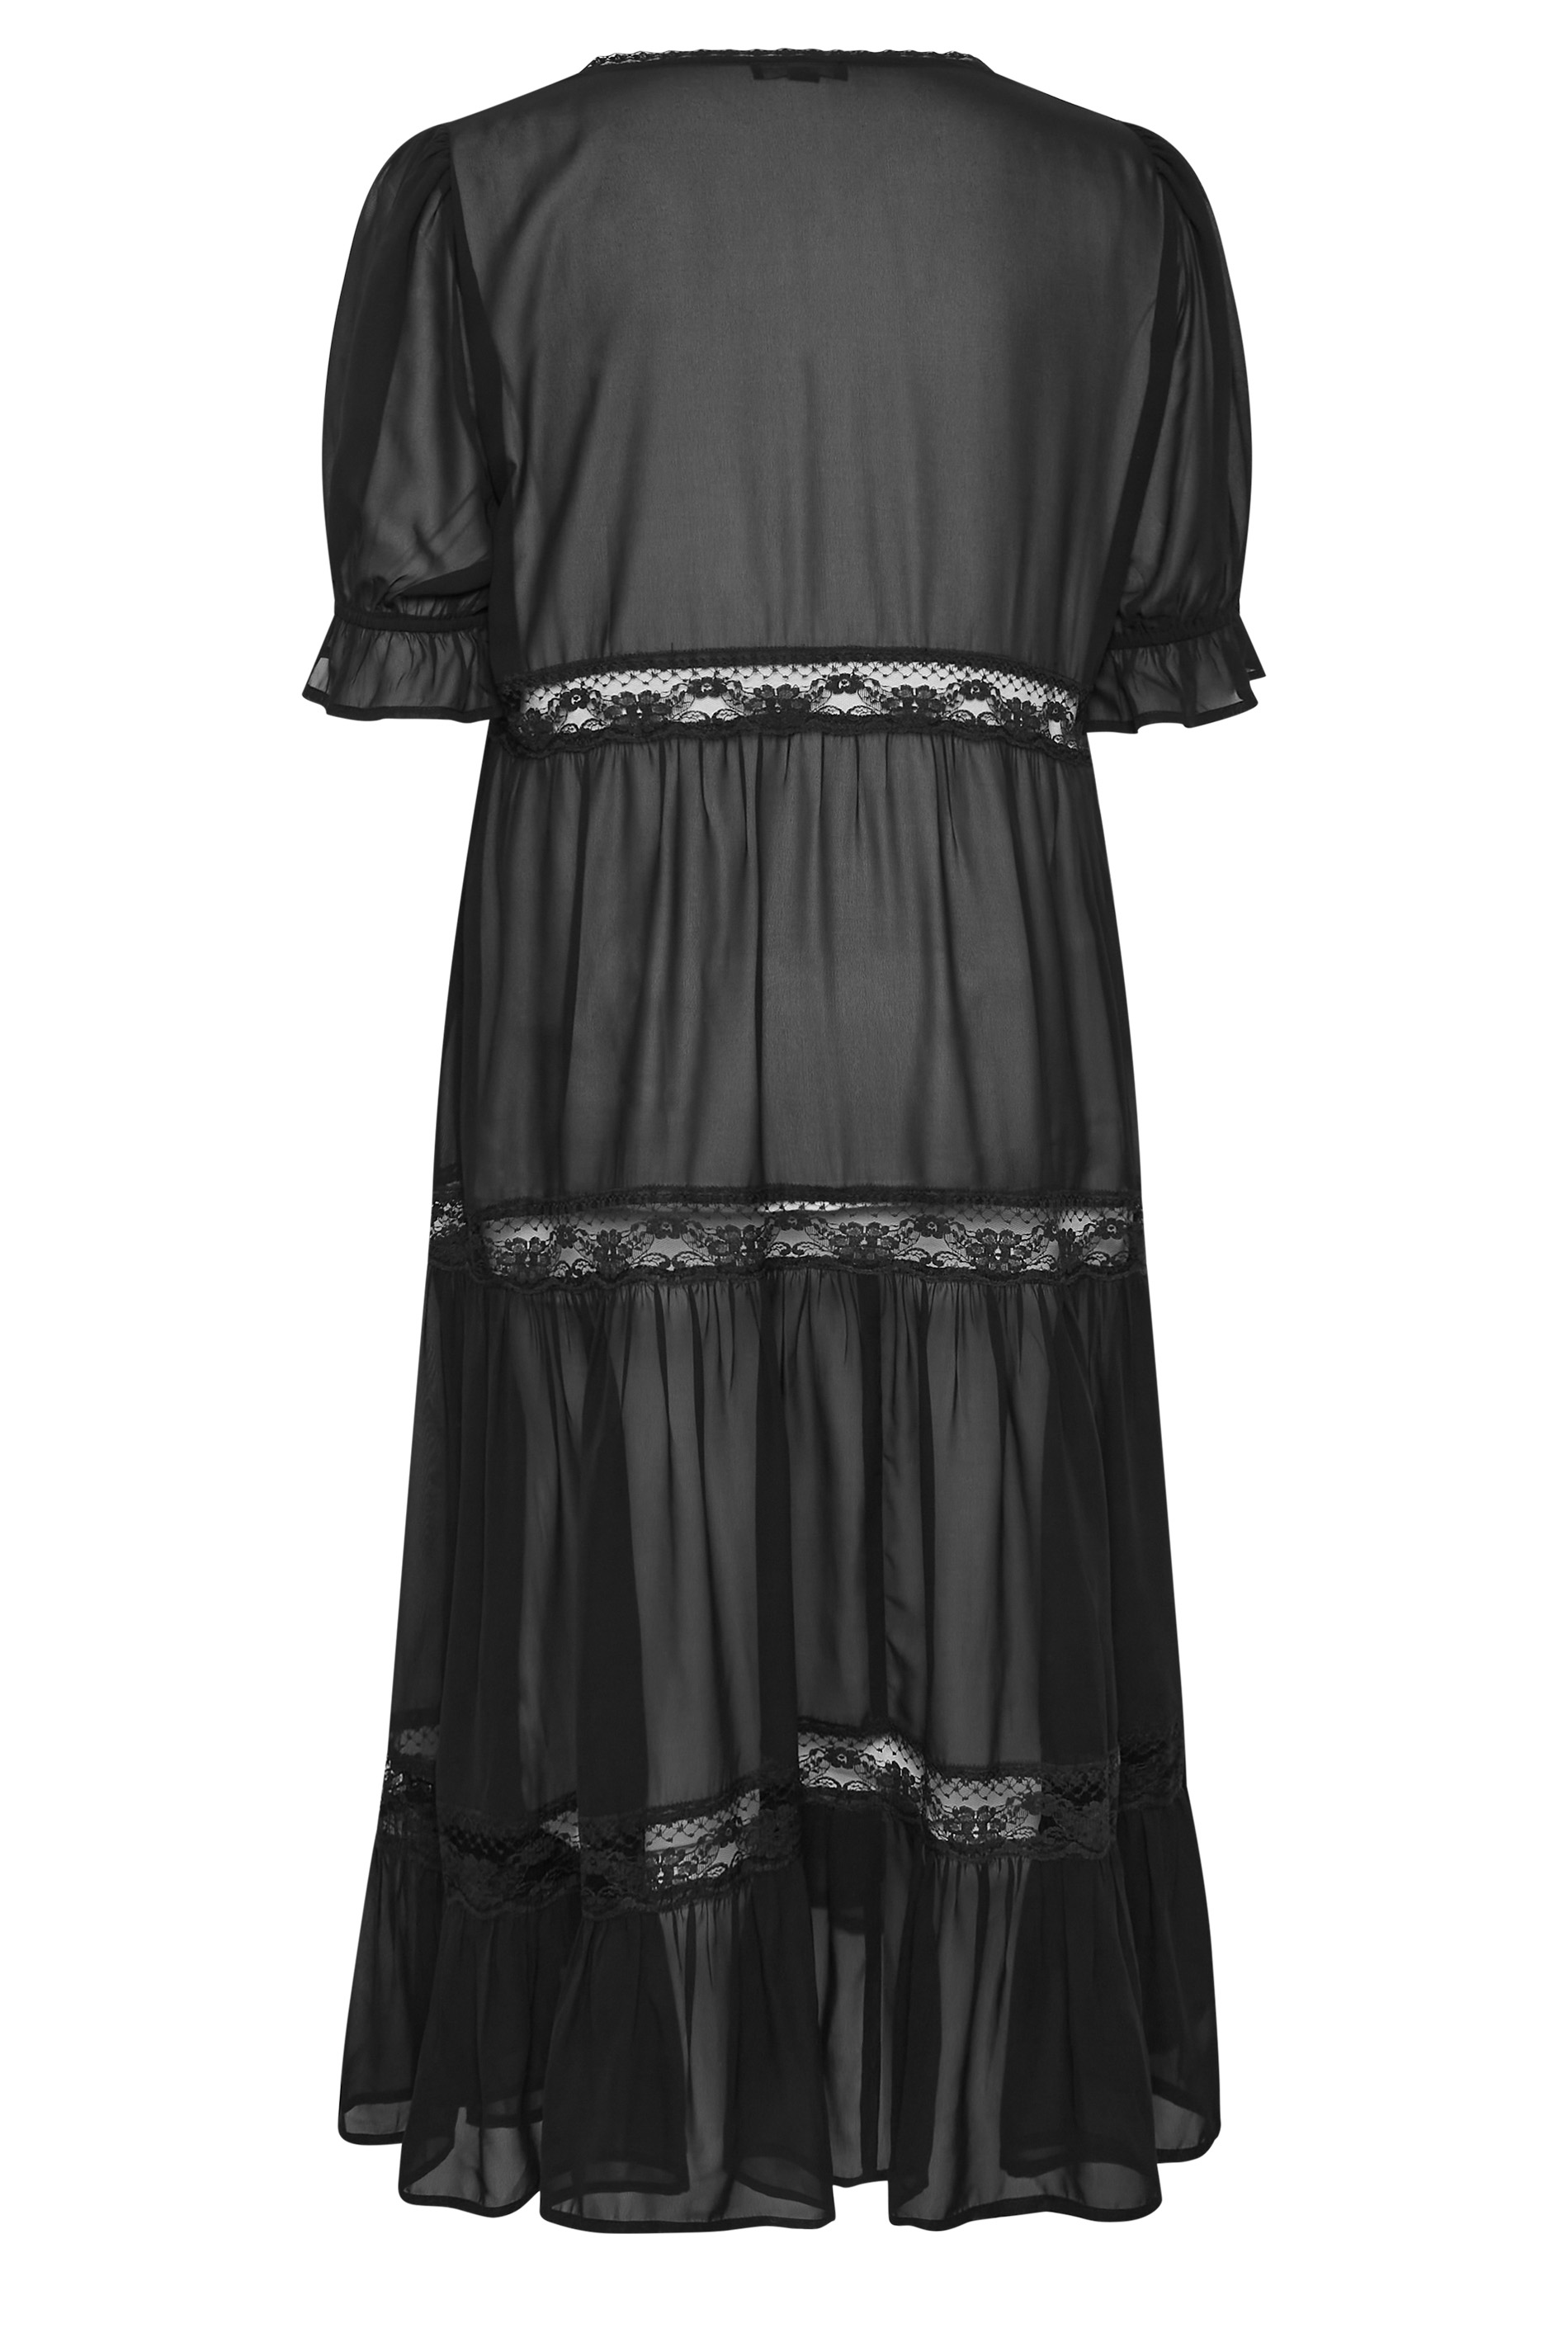 LIMITED COLLECTION Plus Size Black Lace Tiered Kimono | Yours Clothing